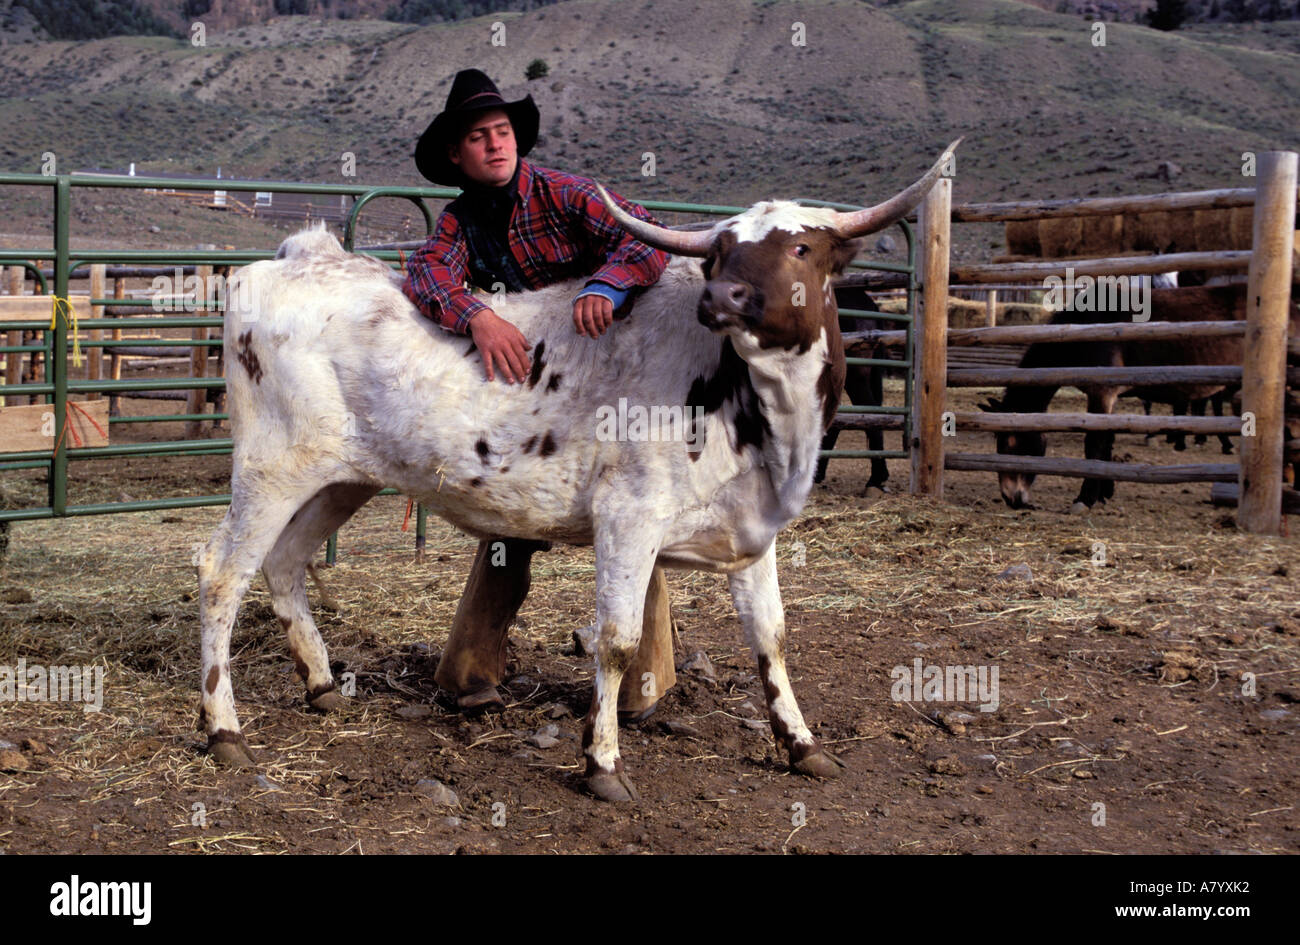 United States, Wyoming, Cody, dude ranch, Double Diamond X ranch, wrangler and a long horn cow Stock Photo